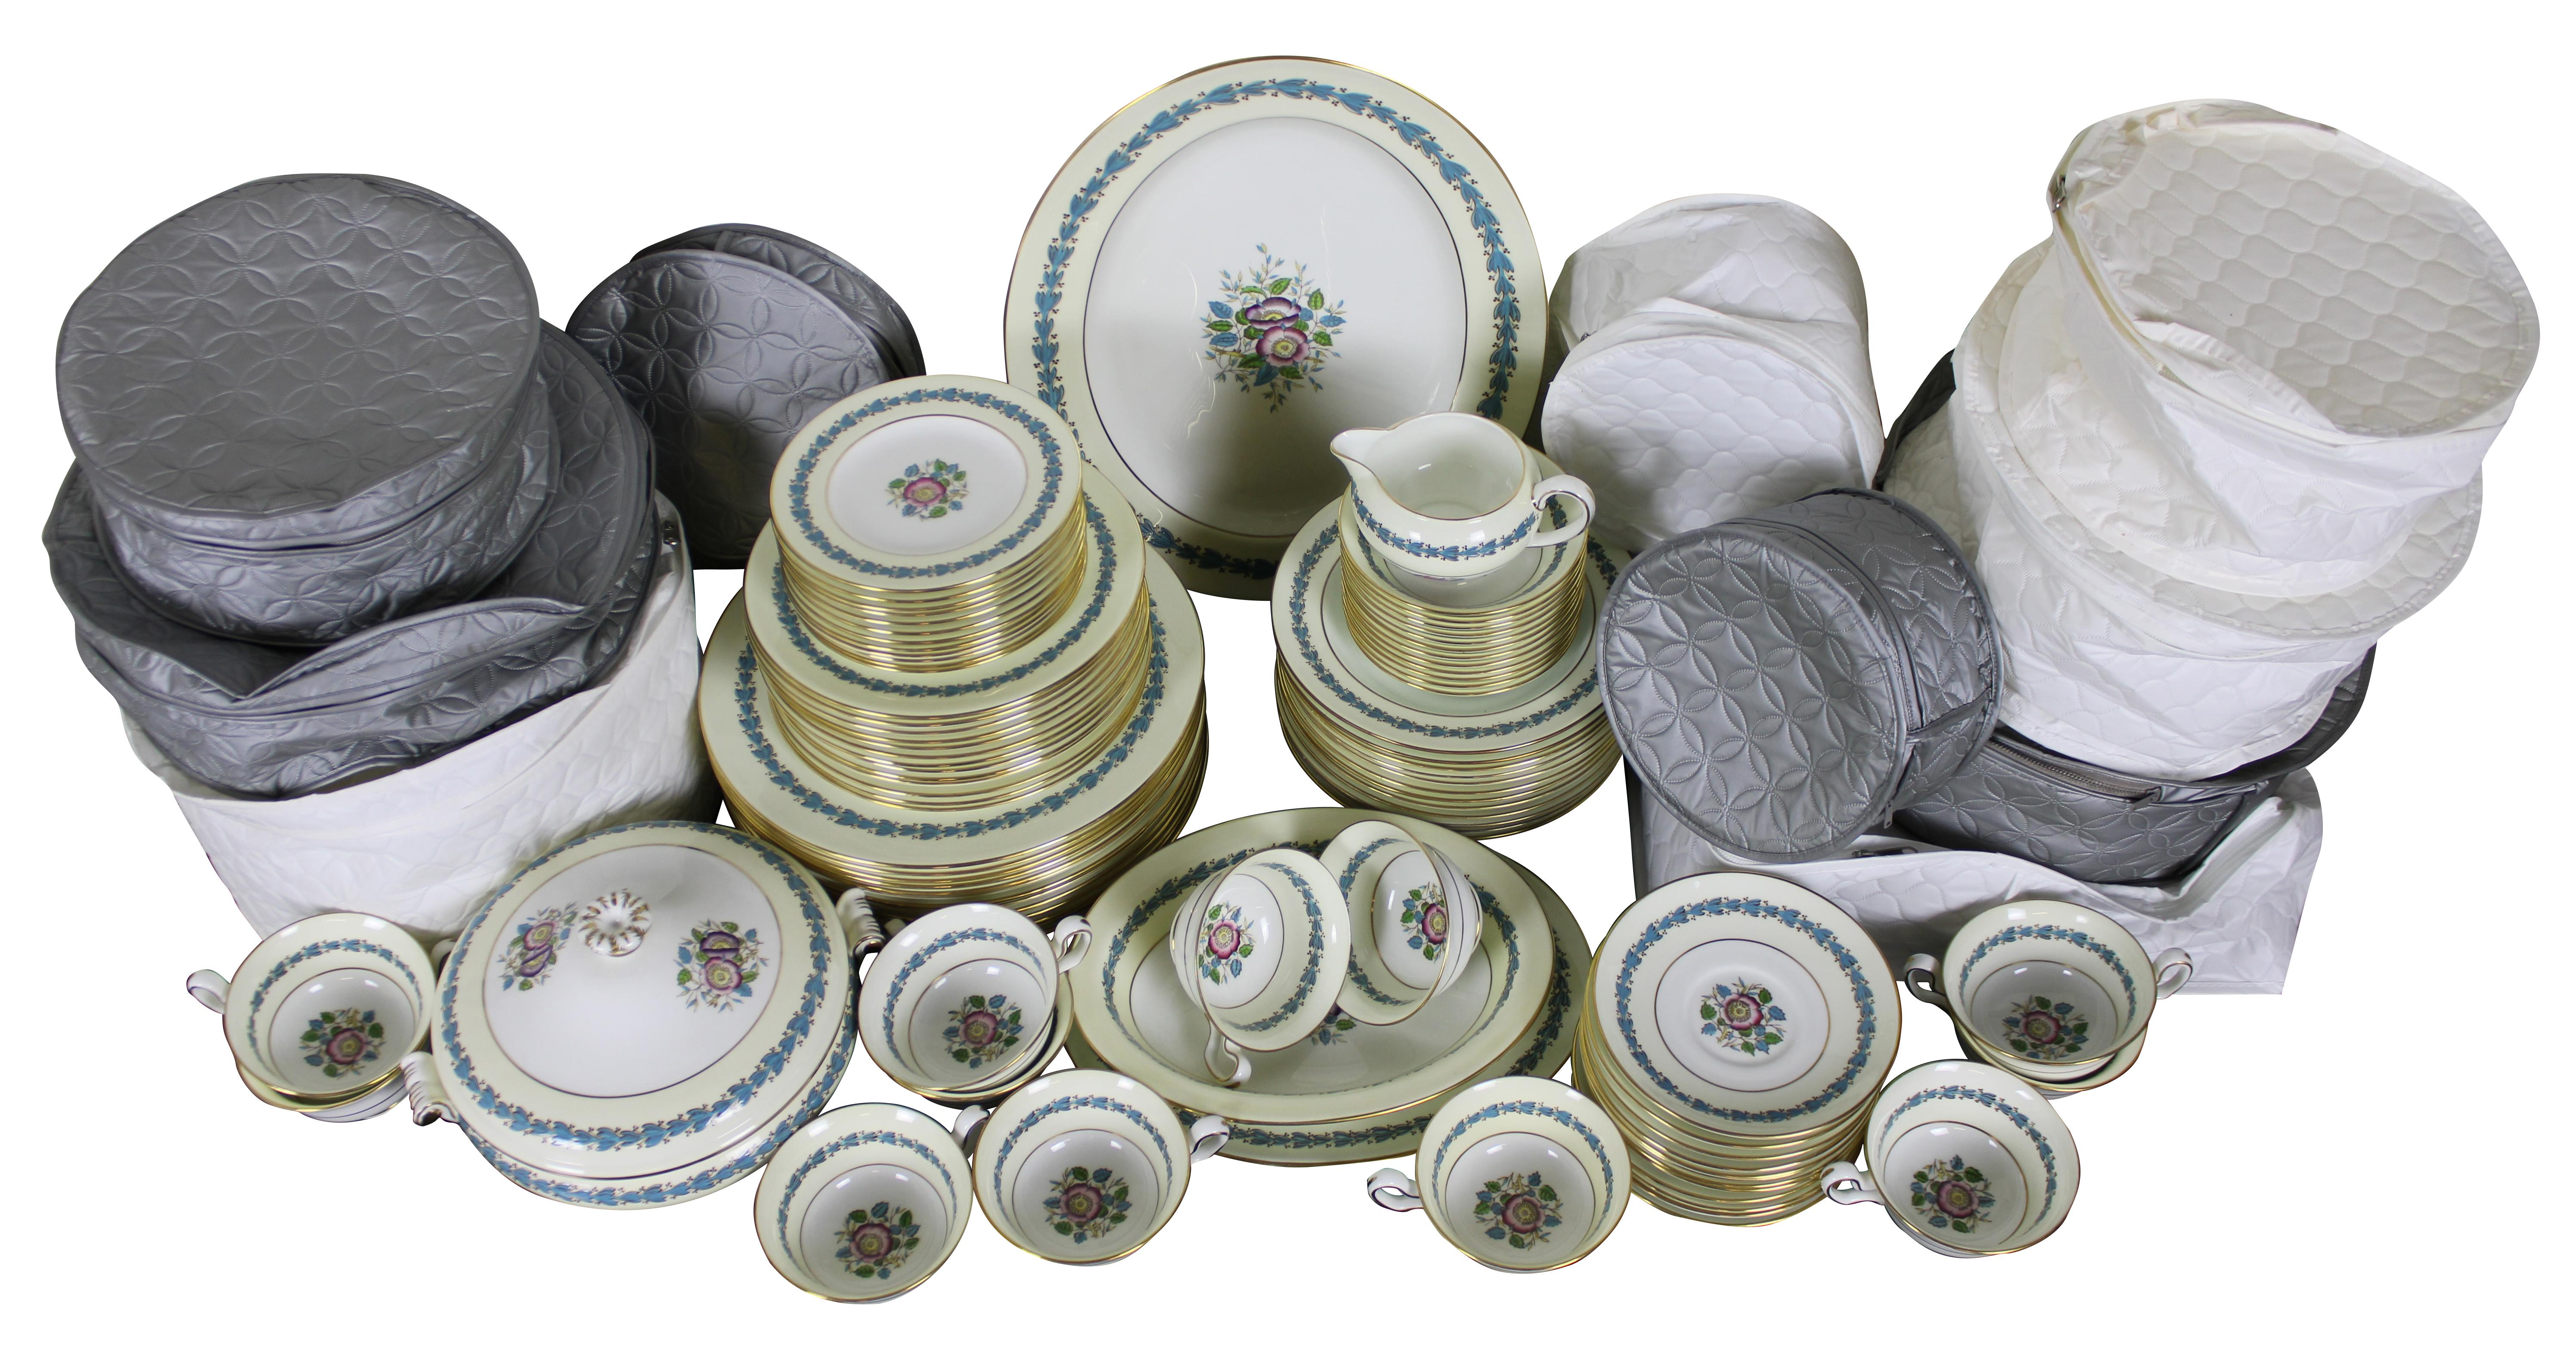 Vintage 79 piece Wedgwood bone china dinnerware set in the raised enamel edge and floral center Westland pattern, plus two pieces in the Appledore pattern.

Vegetable dish - 9.75” x 7.5” x 1.75” / small platter - 11” x 8.5” / large platter -